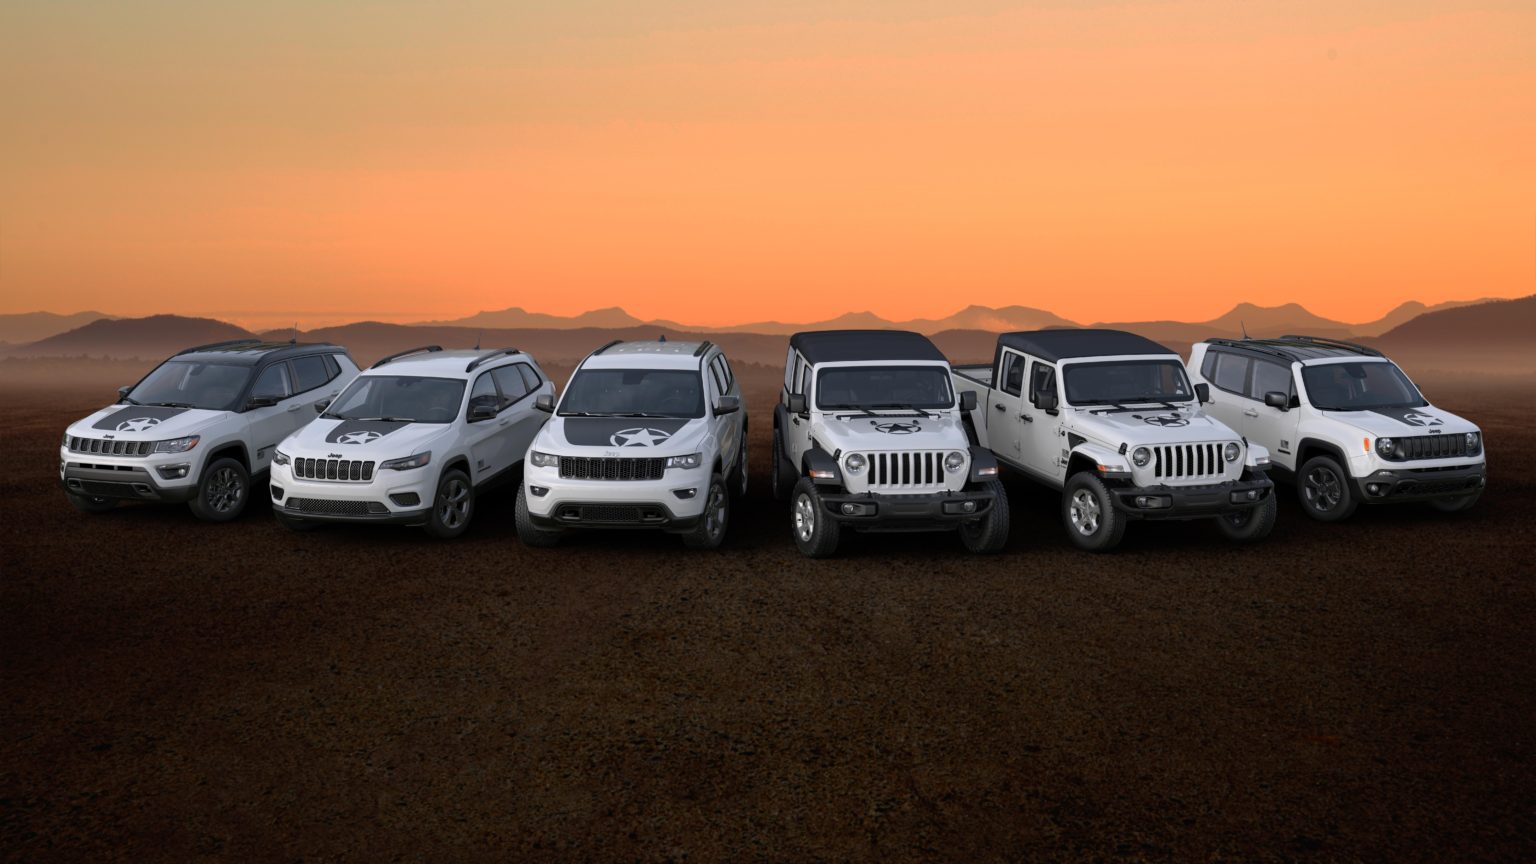 Jeep Freedom models get special appearance-related upgrades.